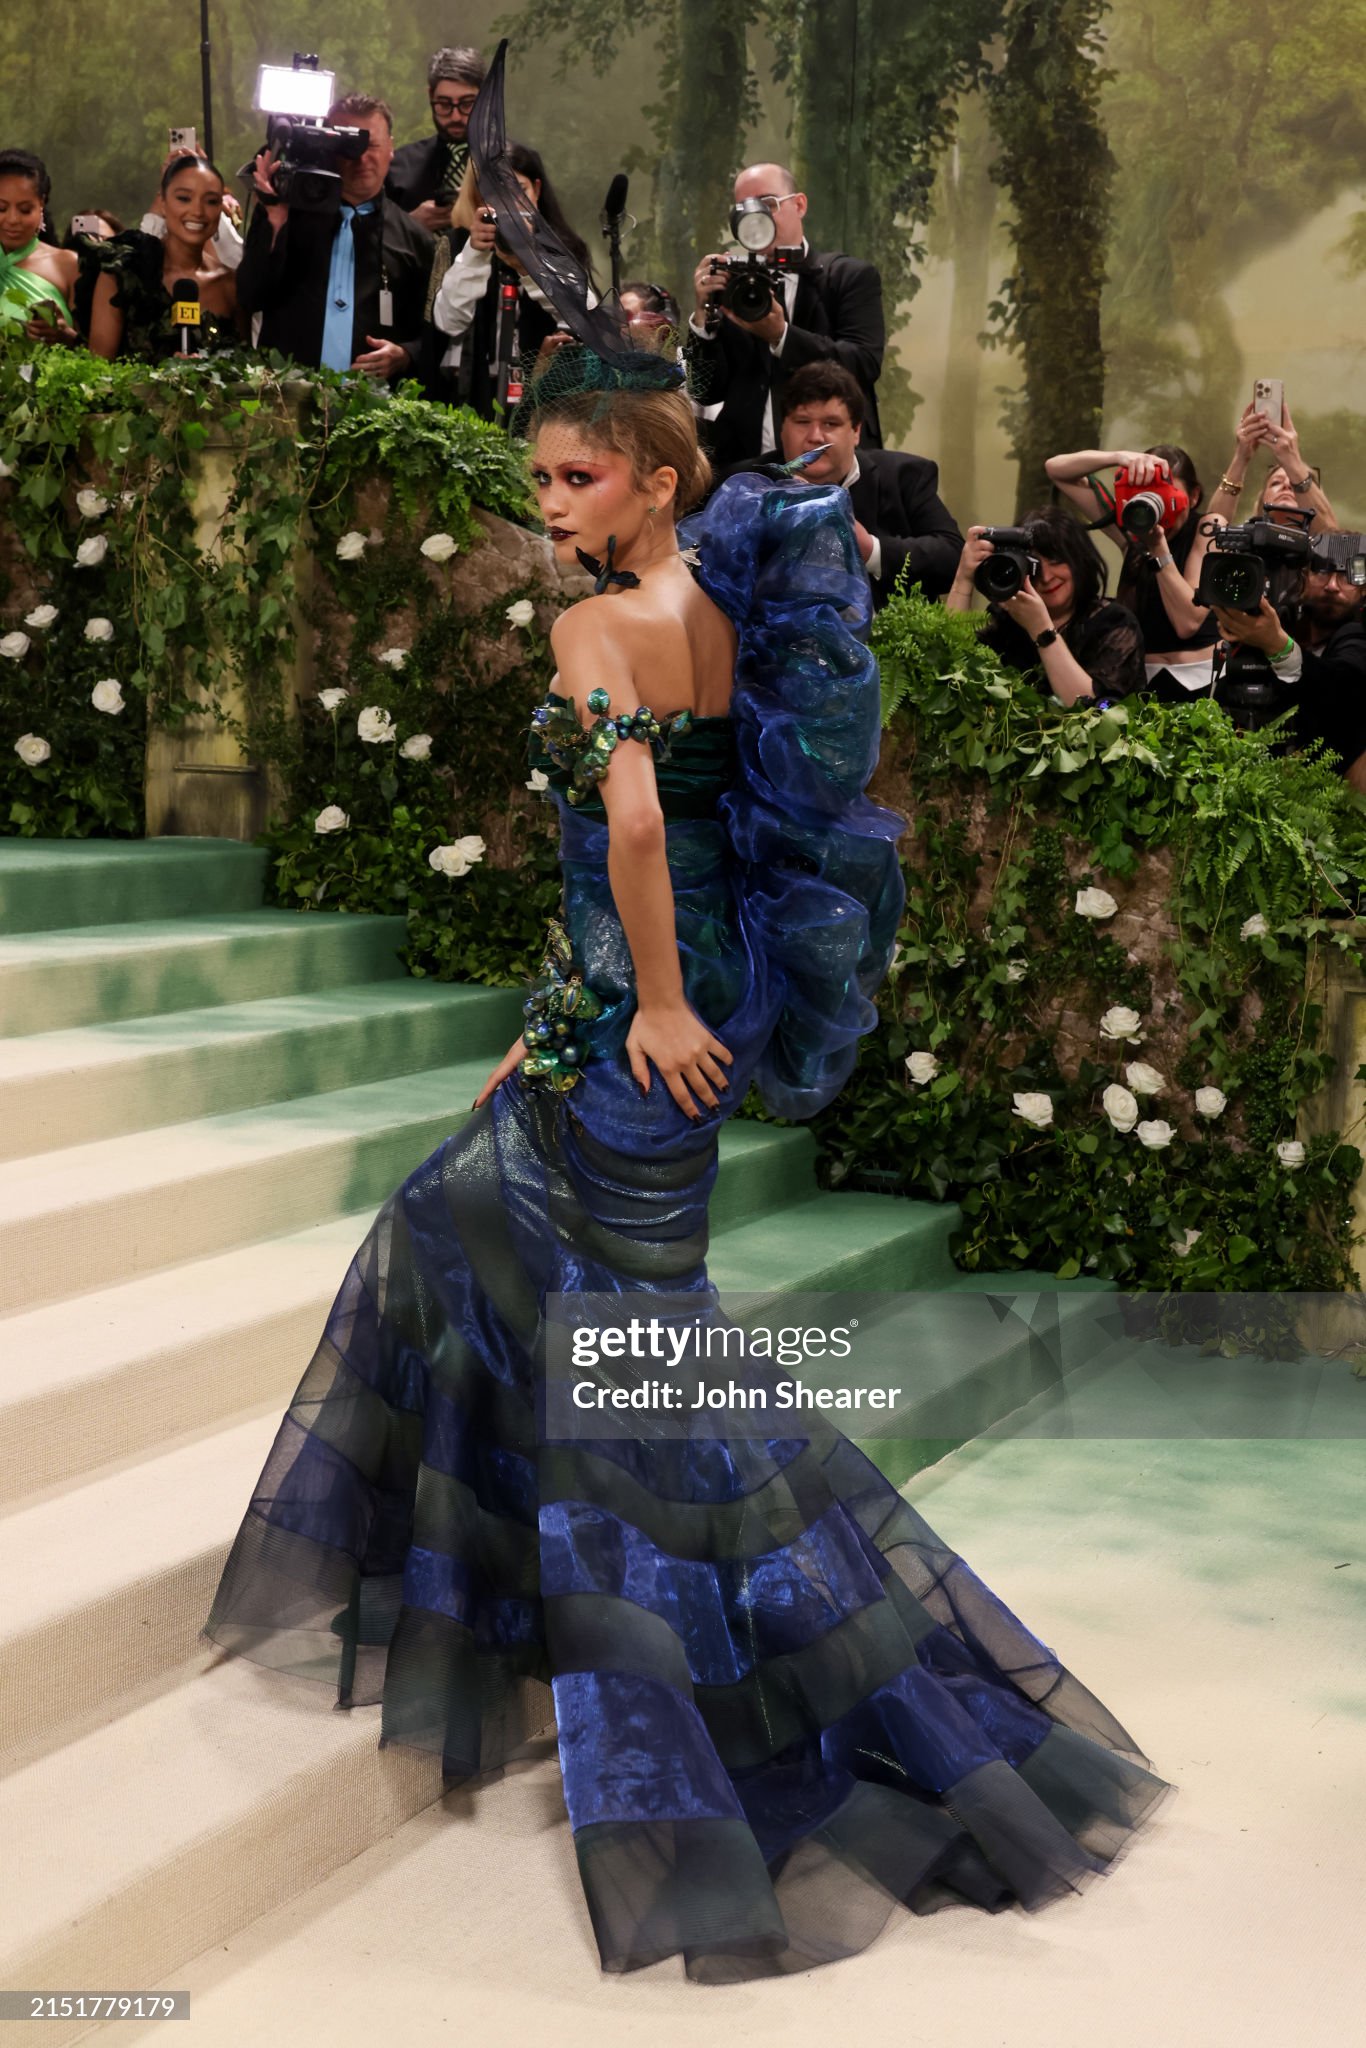 gettyimages-2151779179-2048x2048.jpg